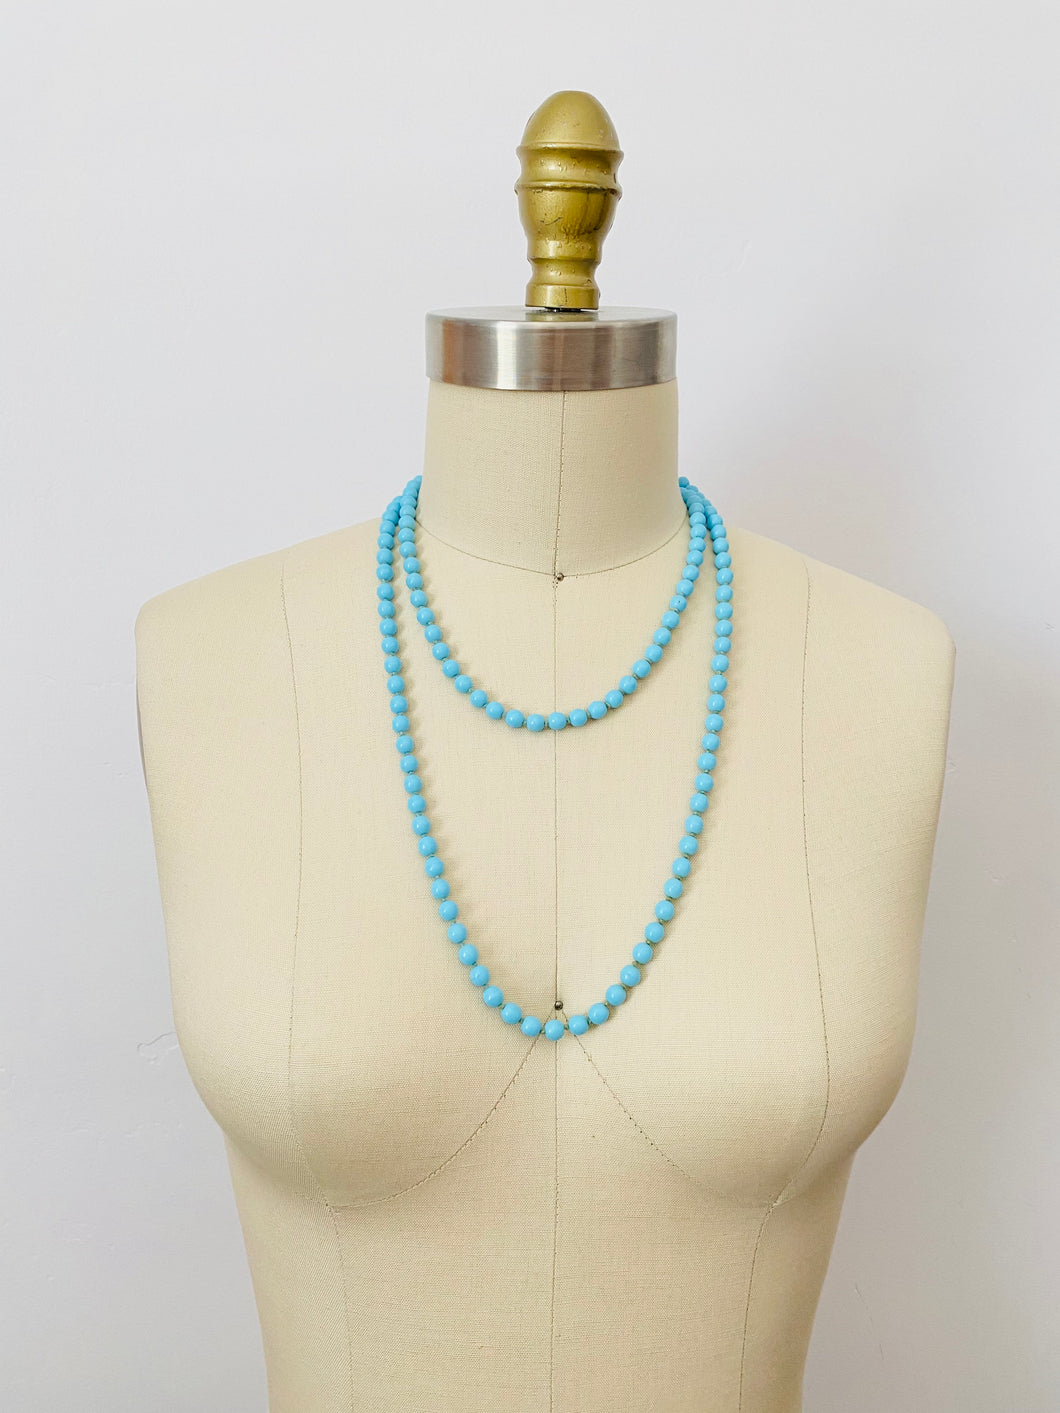 Vintage 1920s turquoise color glass beads flapper necklace